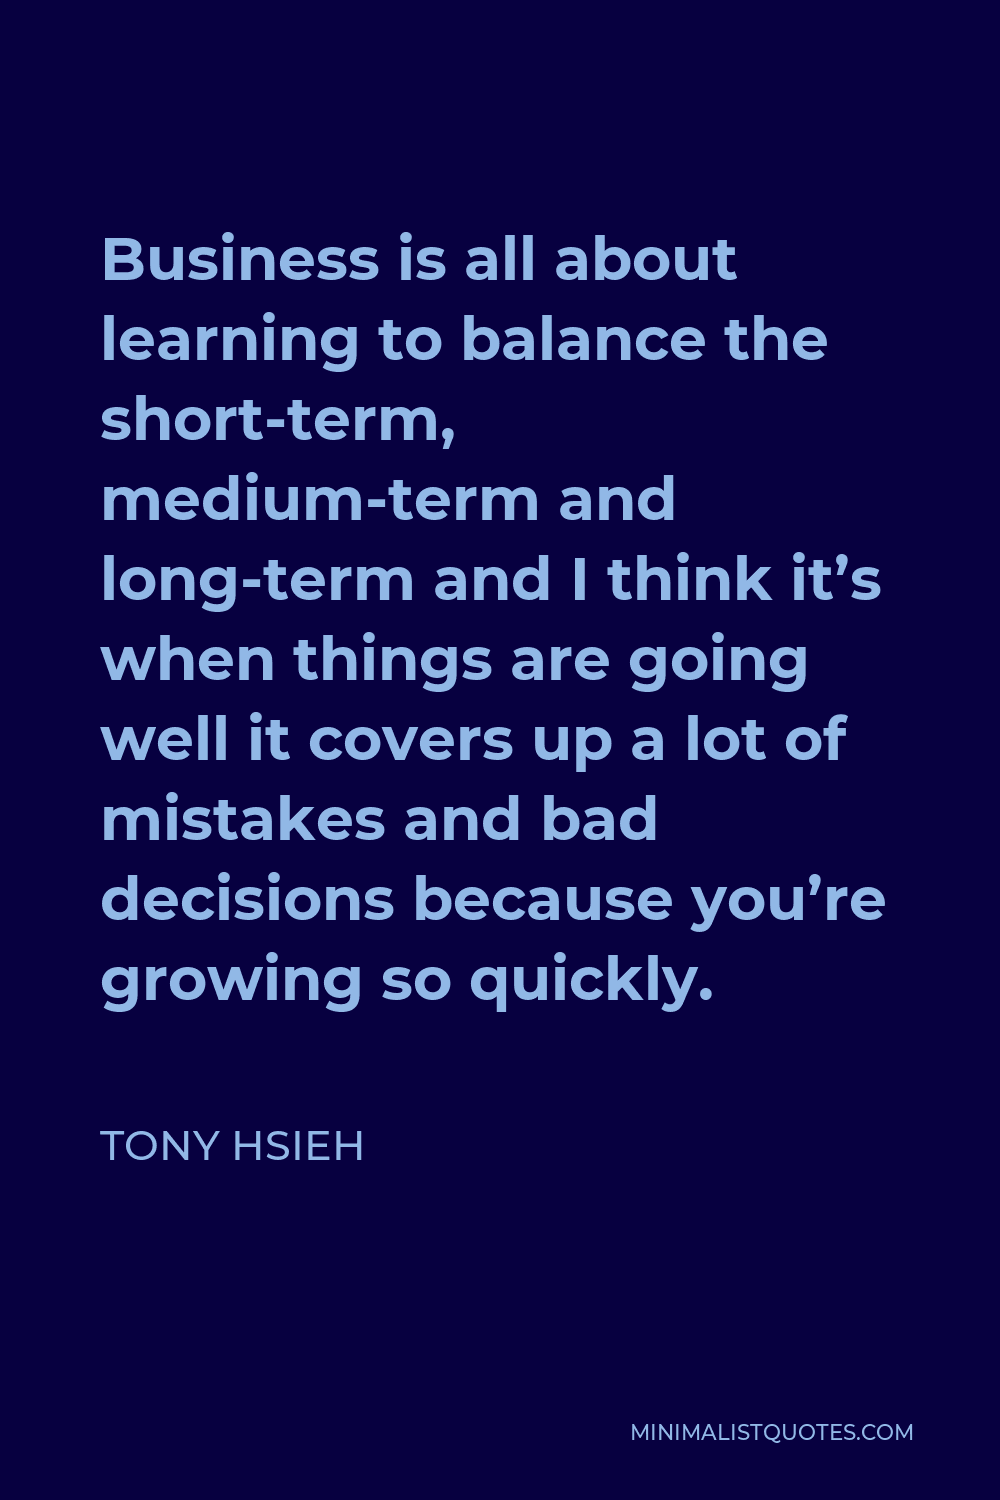 Tony Hsieh Quote - Business is all about learning to balance the short-term, medium-term and long-term and I think it’s when things are going well it covers up a lot of mistakes and bad decisions because you’re growing so quickly.